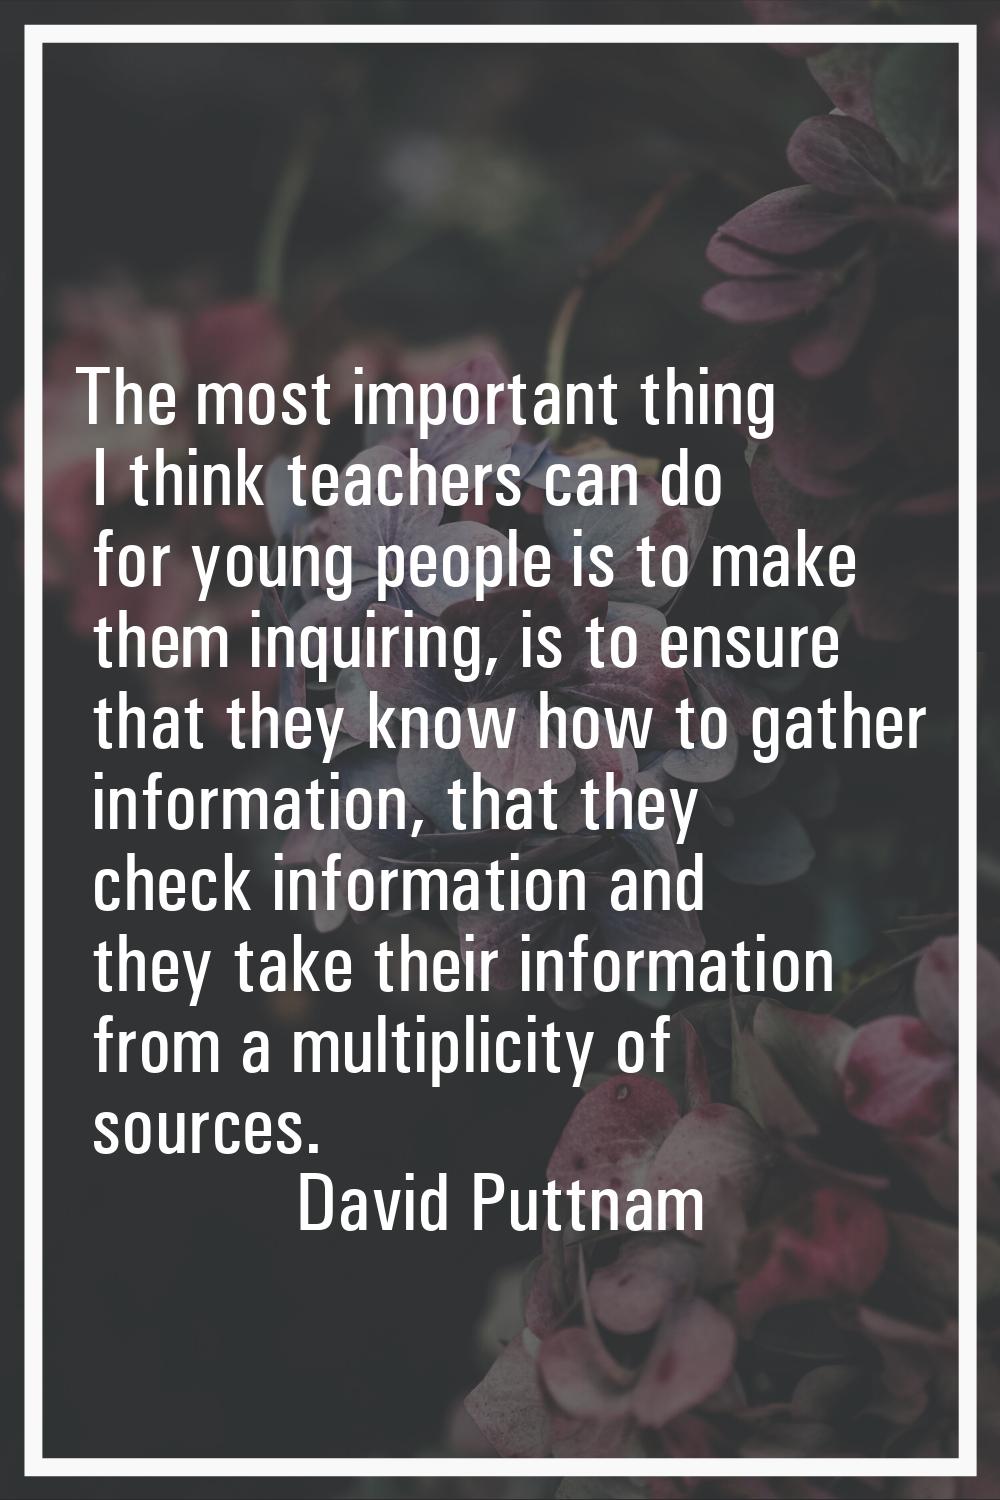 The most important thing I think teachers can do for young people is to make them inquiring, is to 